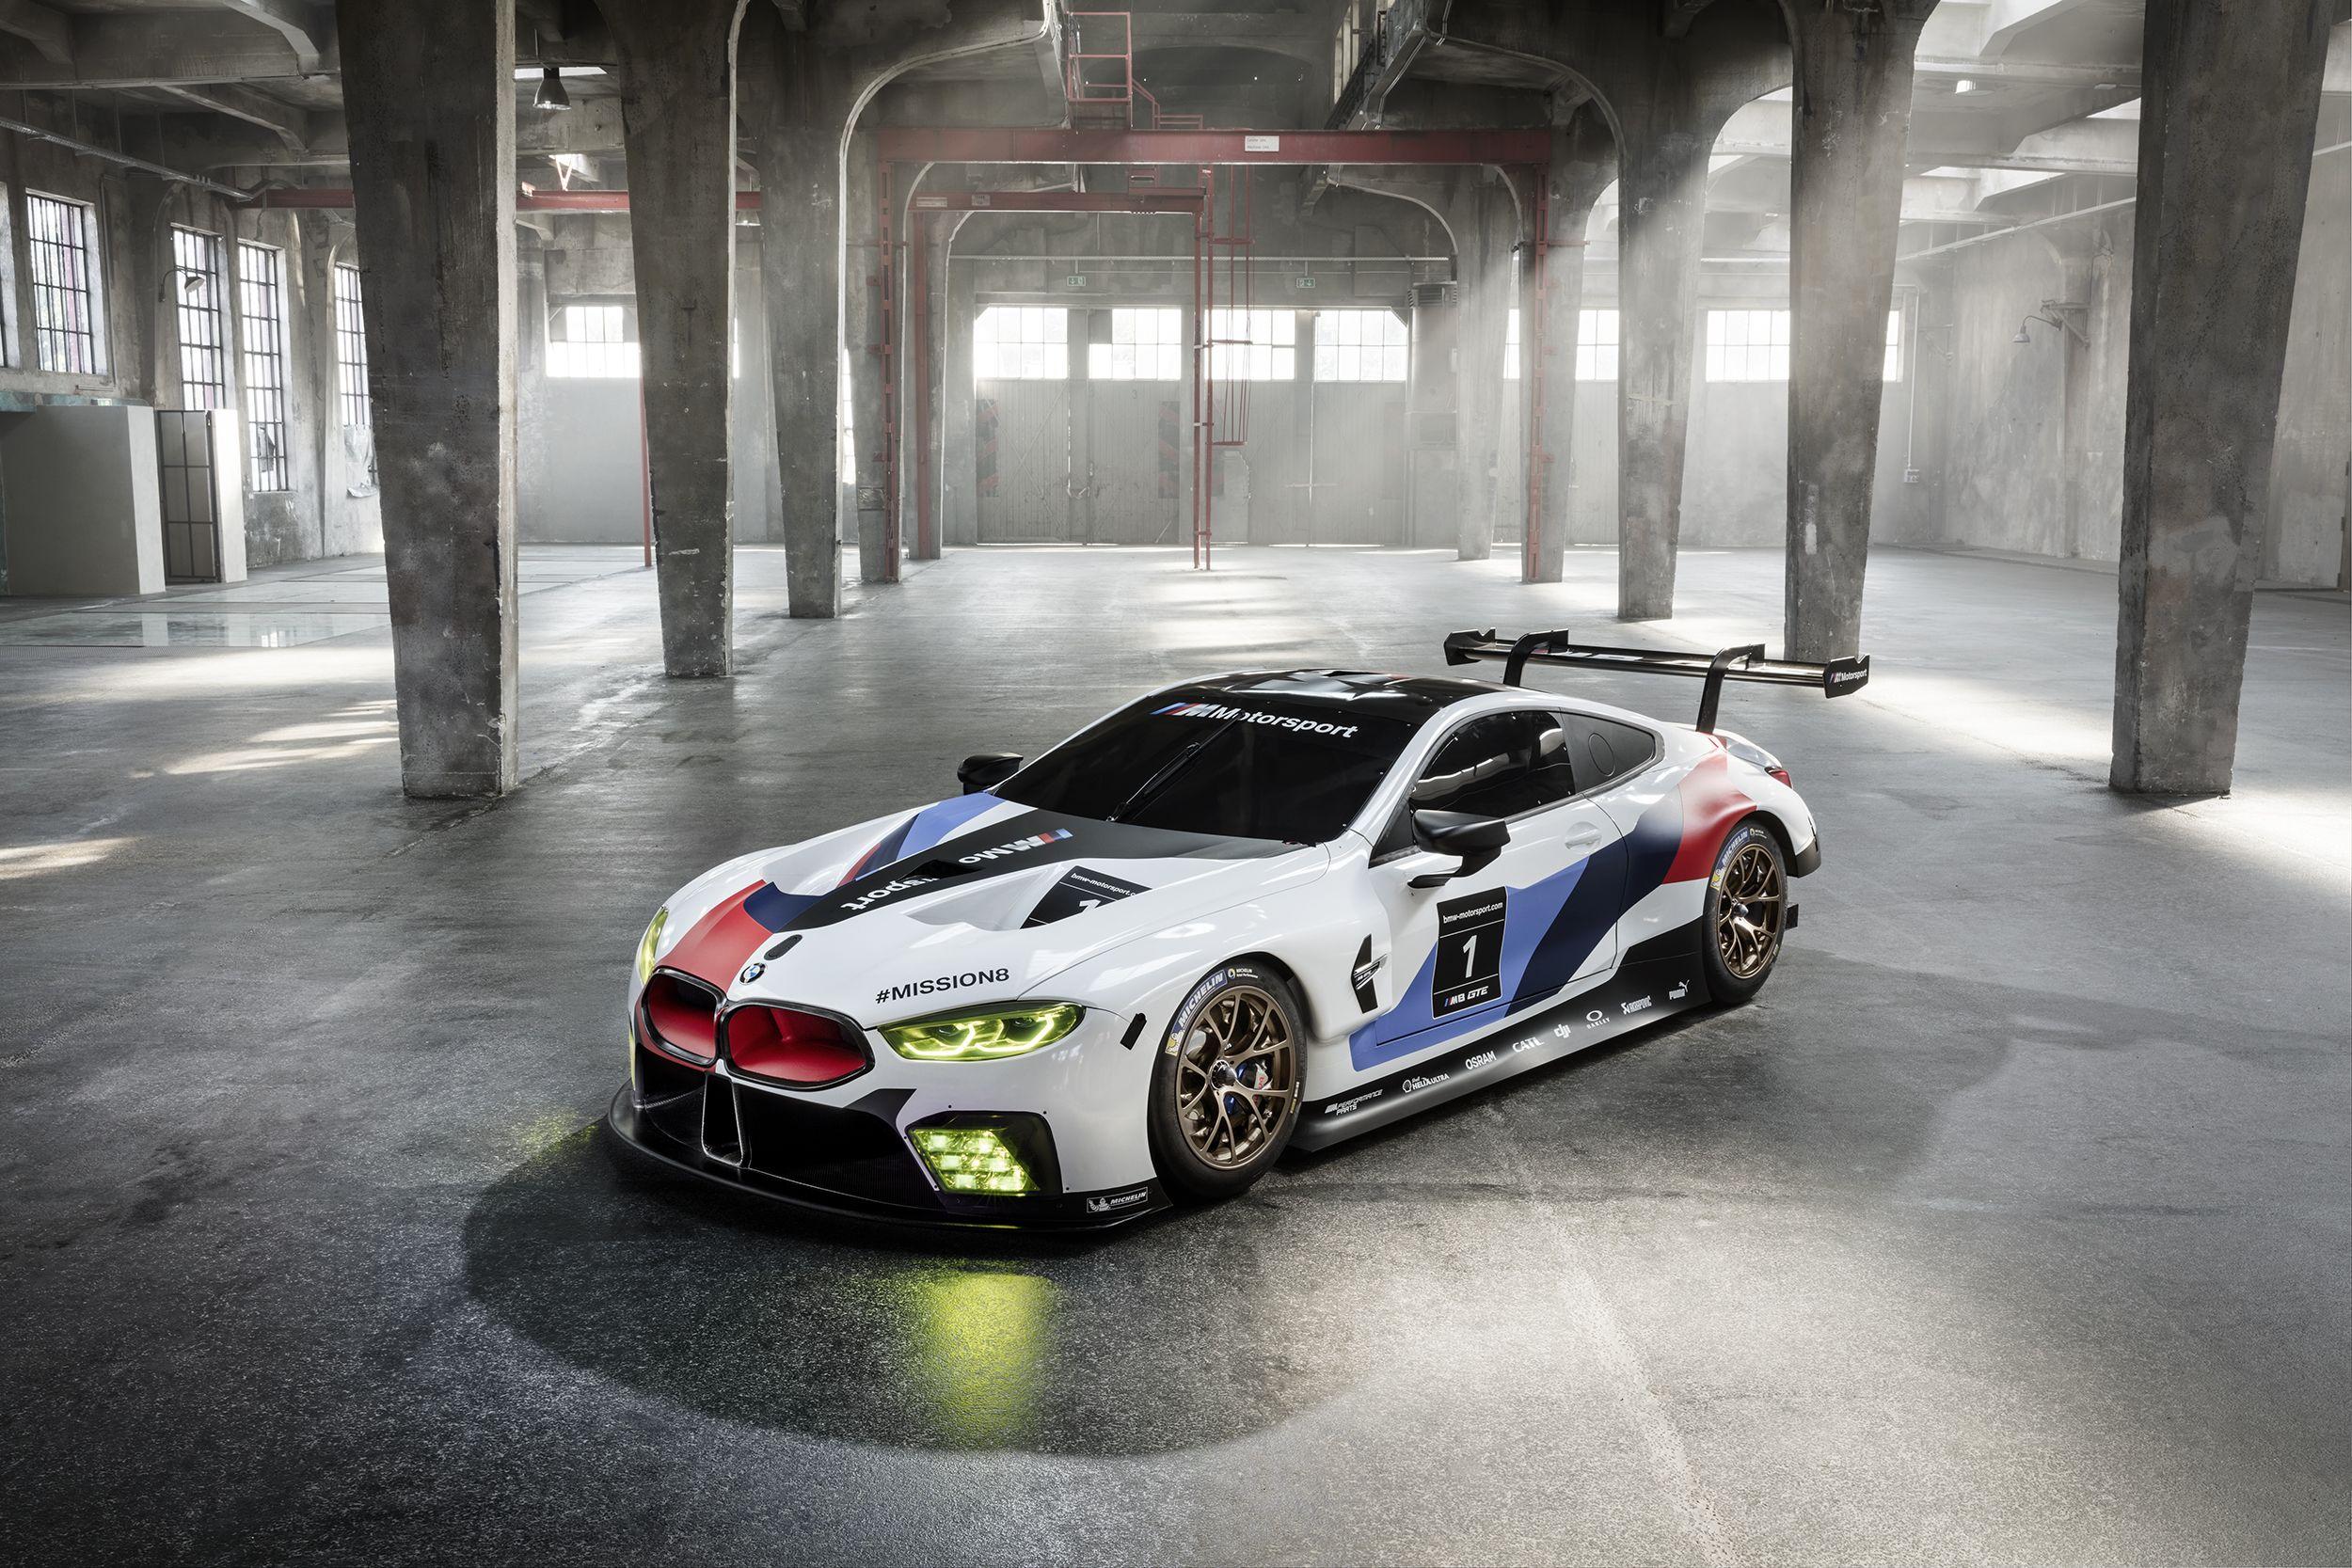 BMW M8 GTE 2018 4k, HD Cars, 4k Wallpapers, Image, Backgrounds